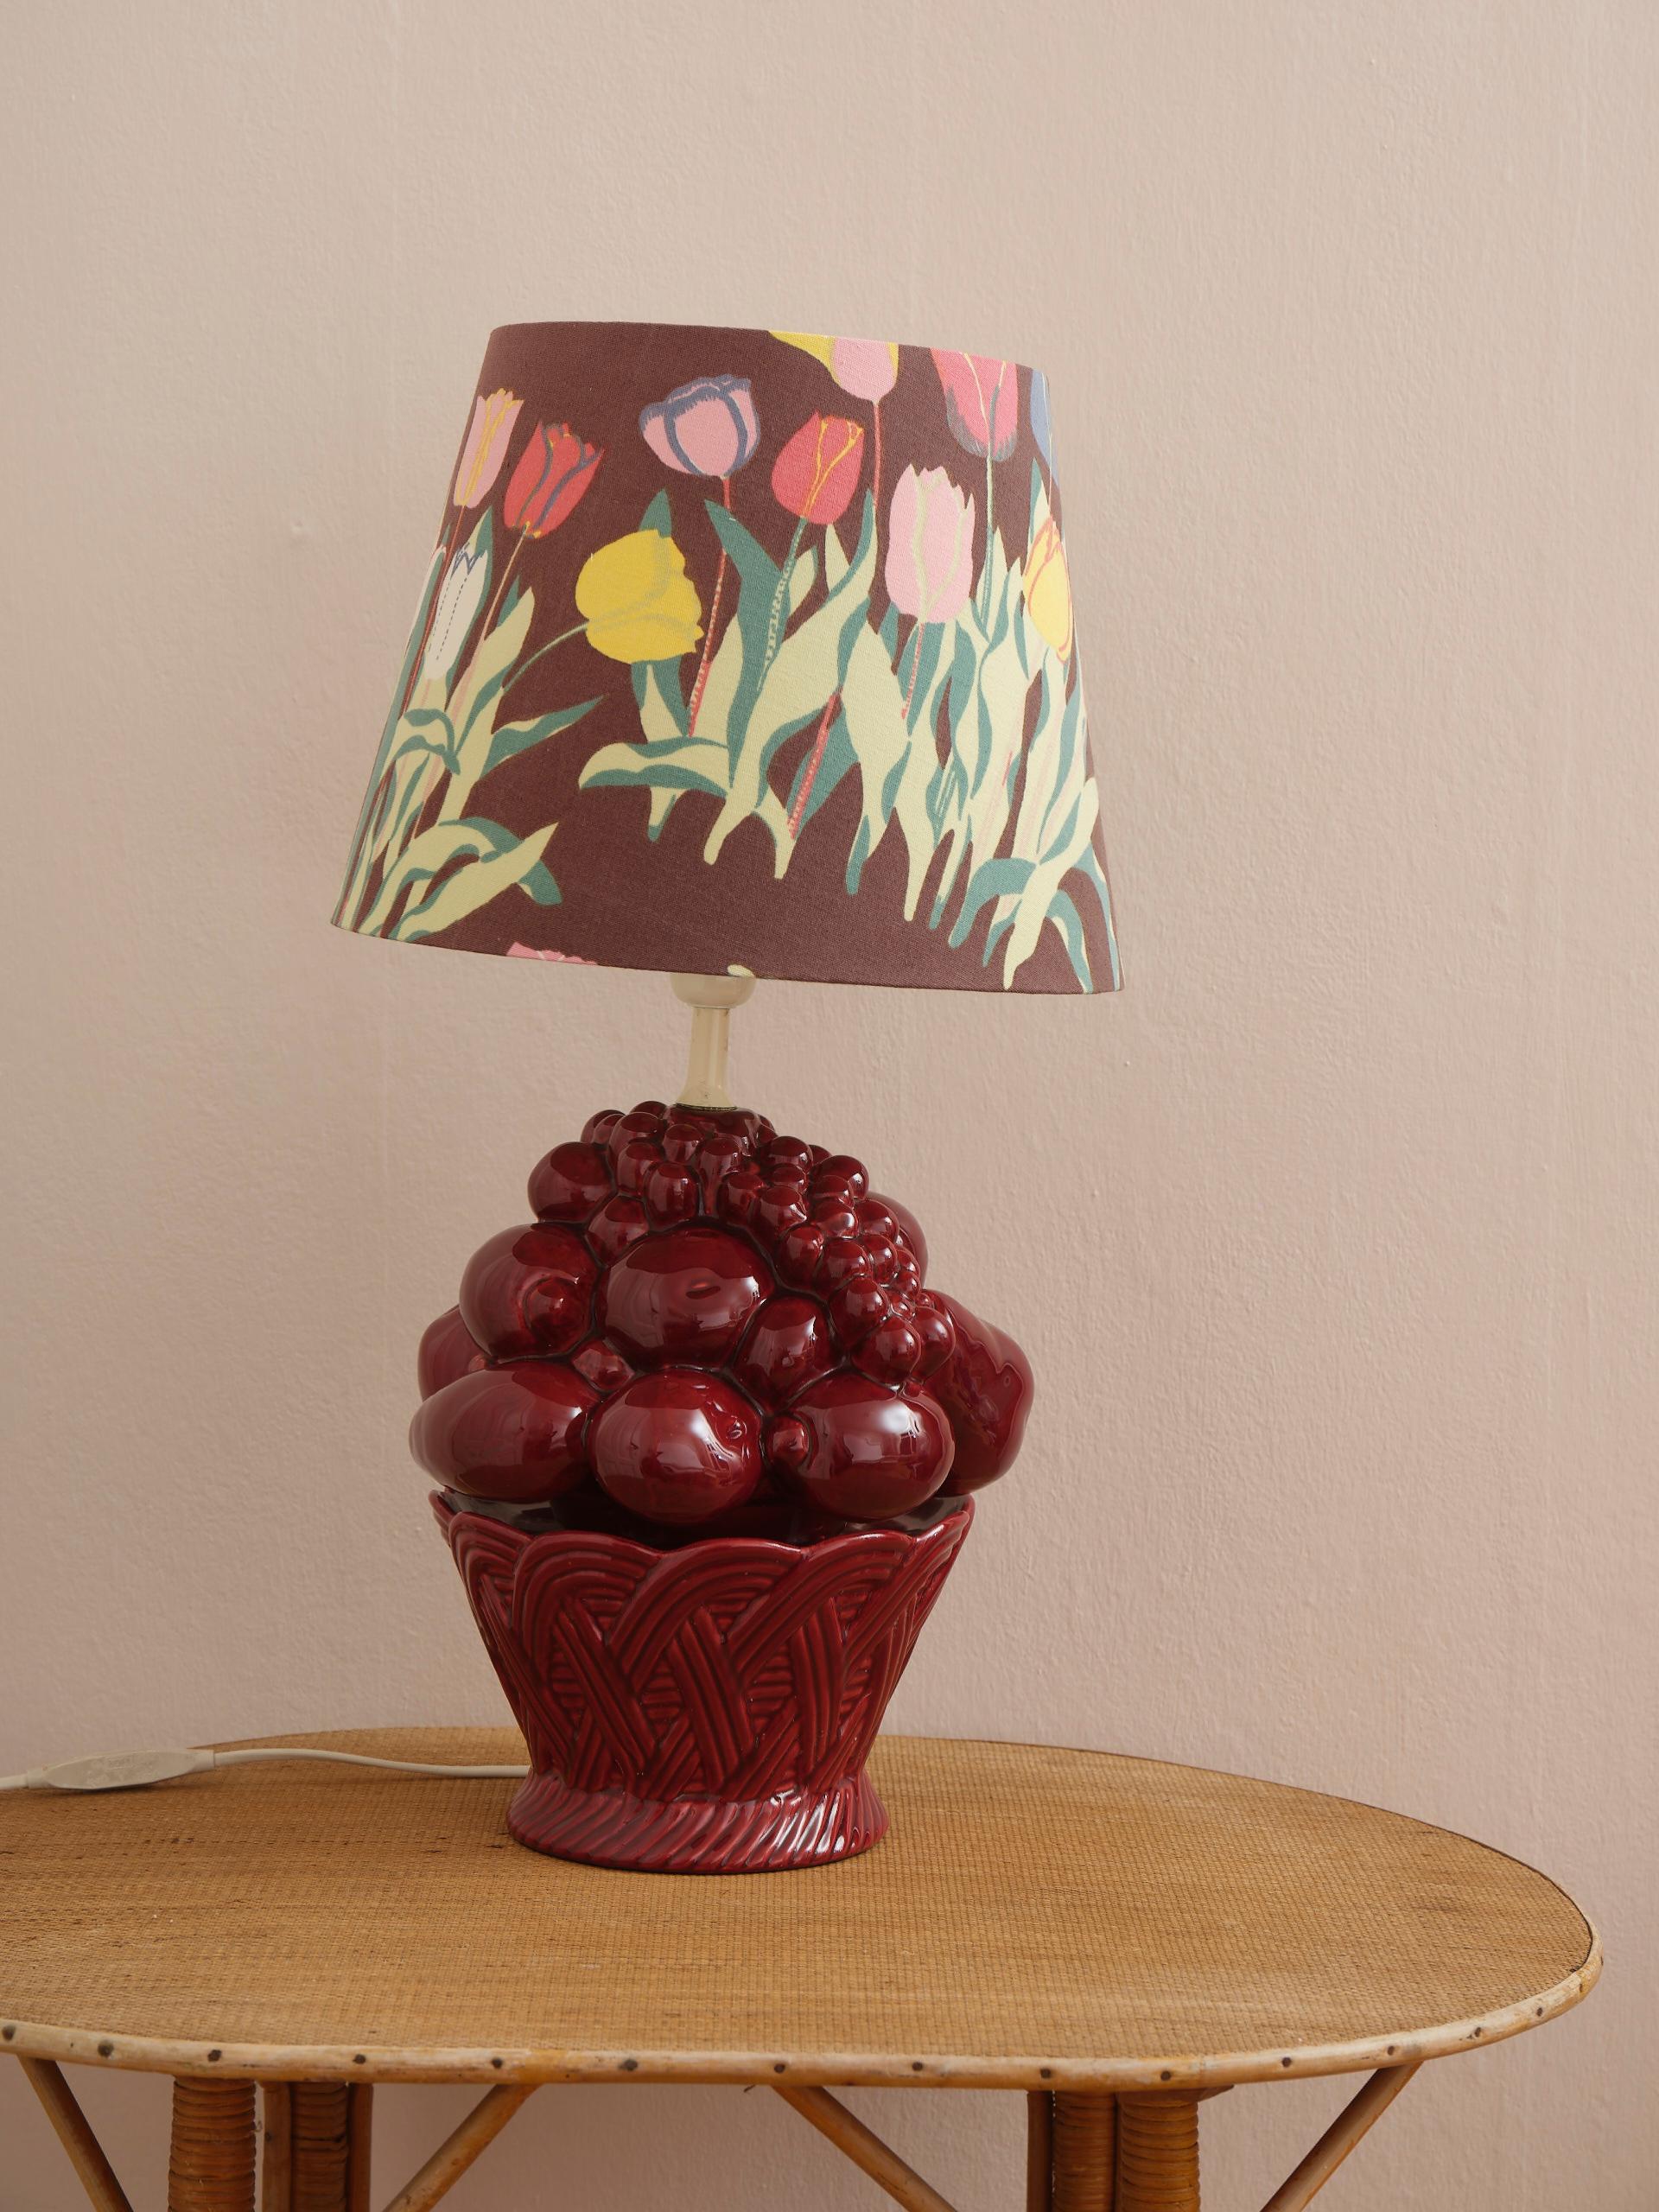 Decorative table lamp in burgundy glazed porcelain in the shape of a fruit bowl. It looks decadently Italian, but is more likely from Swedish Bofa, but who cares with this look. The lamp is shown with a handmade shade in vintage textile by Swedish